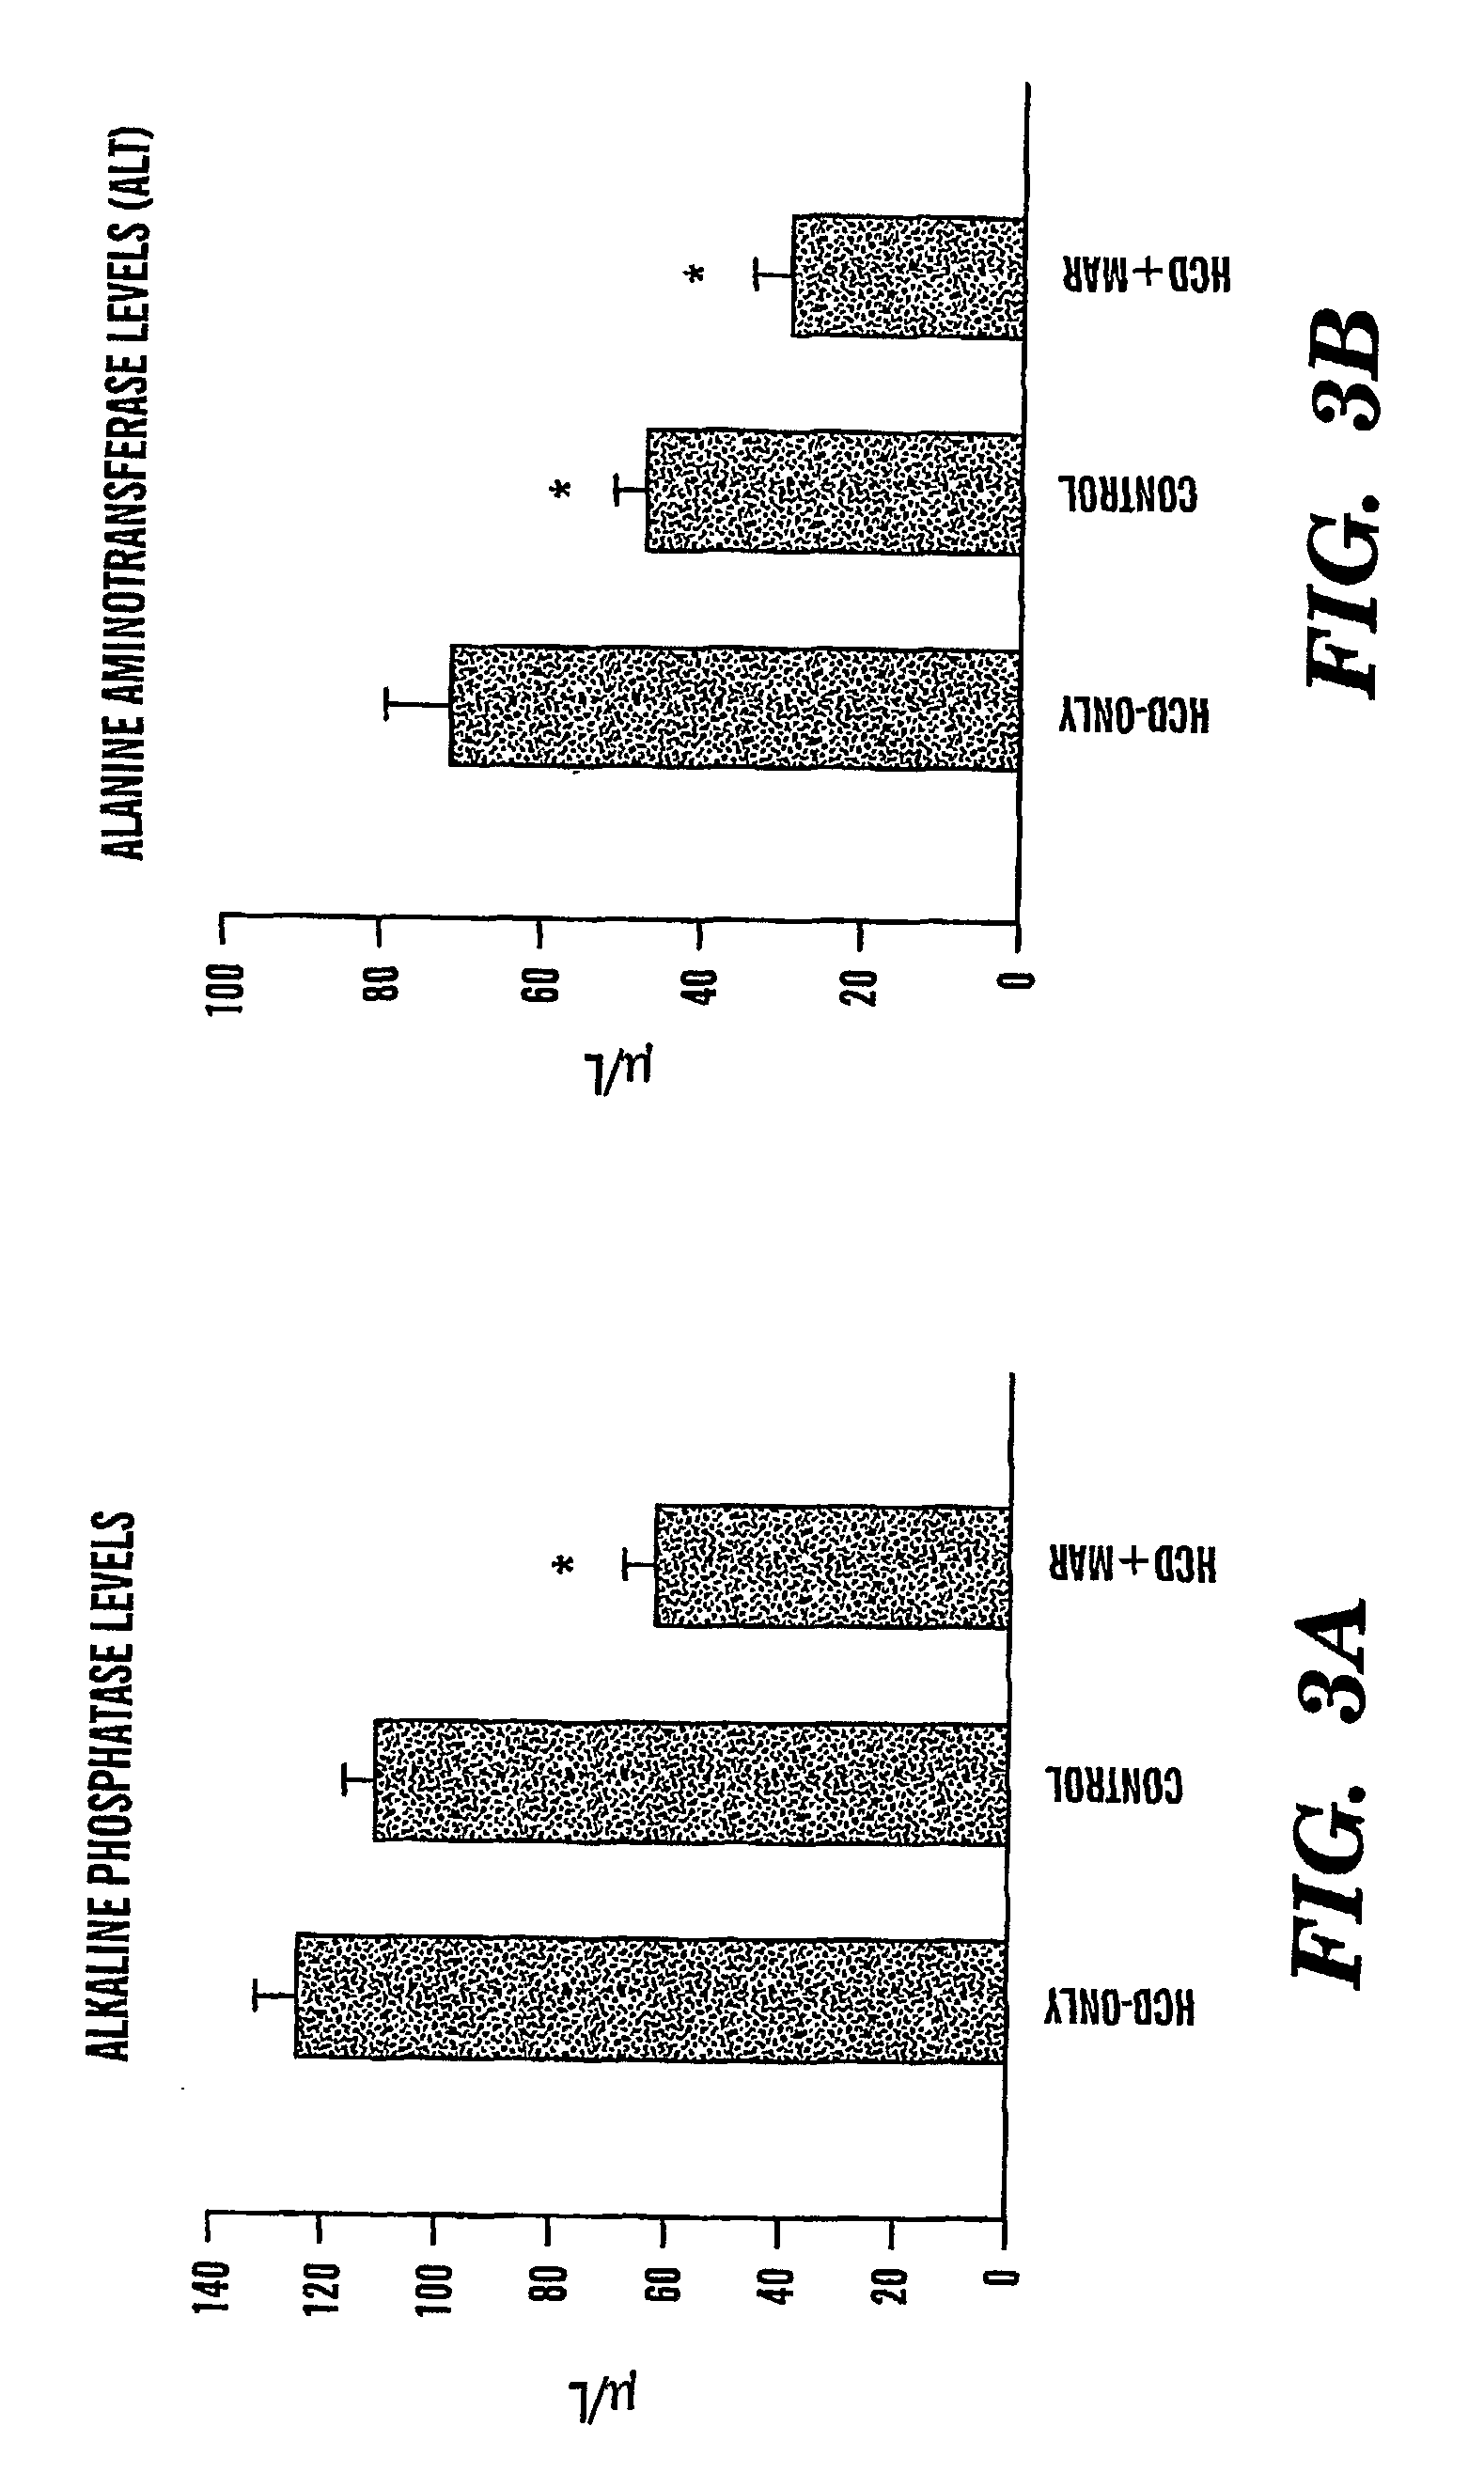 Method of treating fatty liver disease